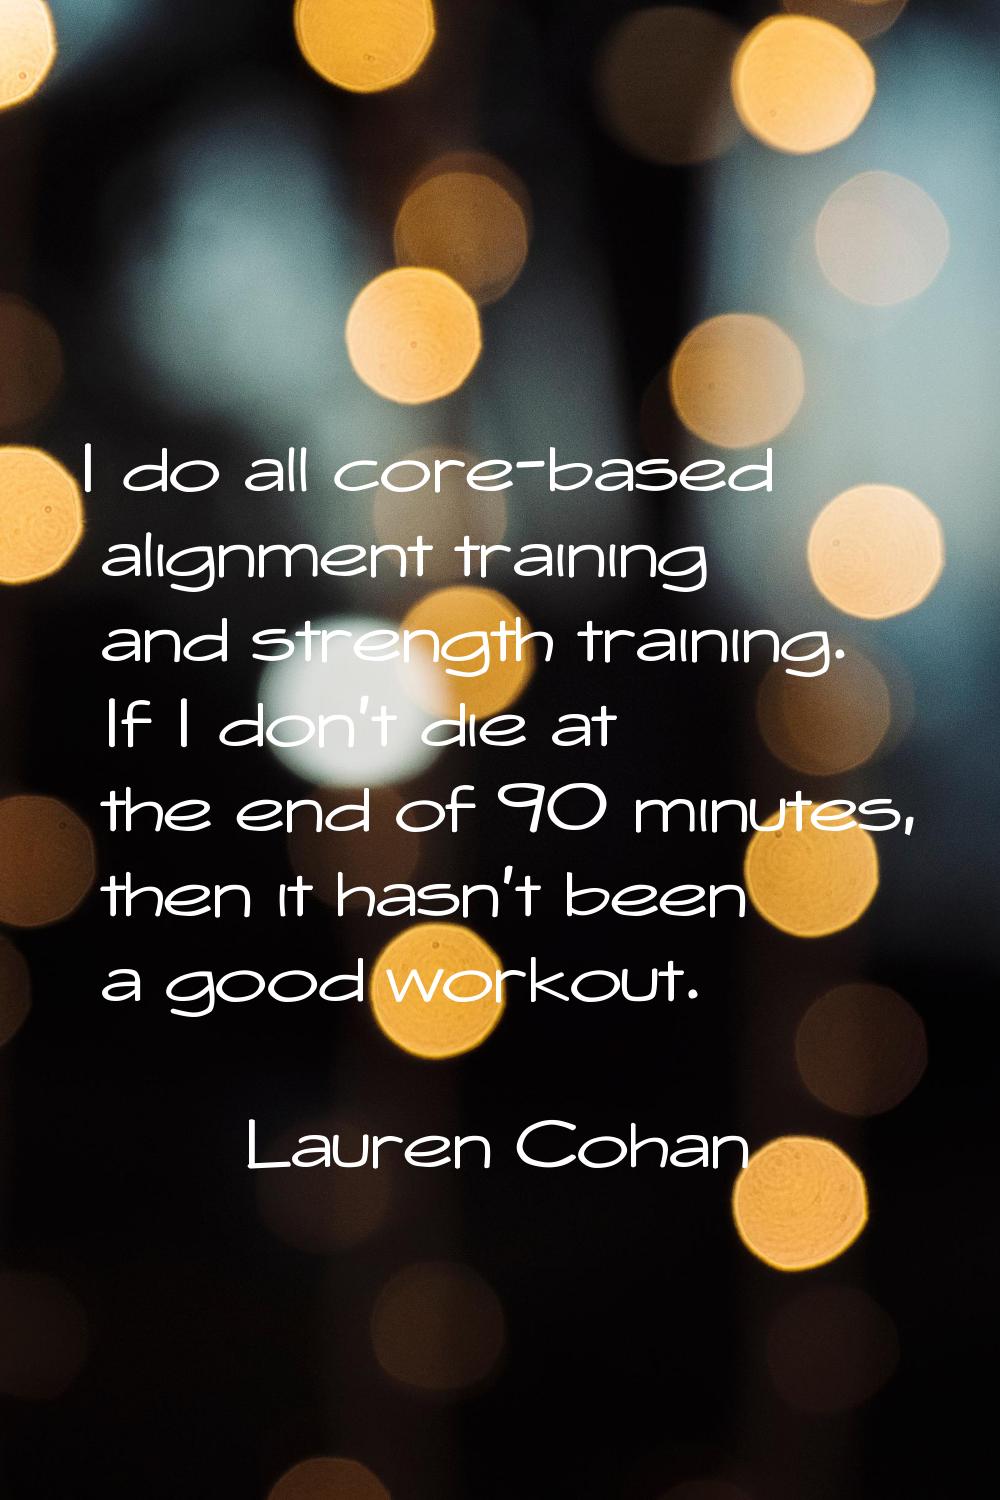 I do all core-based alignment training and strength training. If I don't die at the end of 90 minut